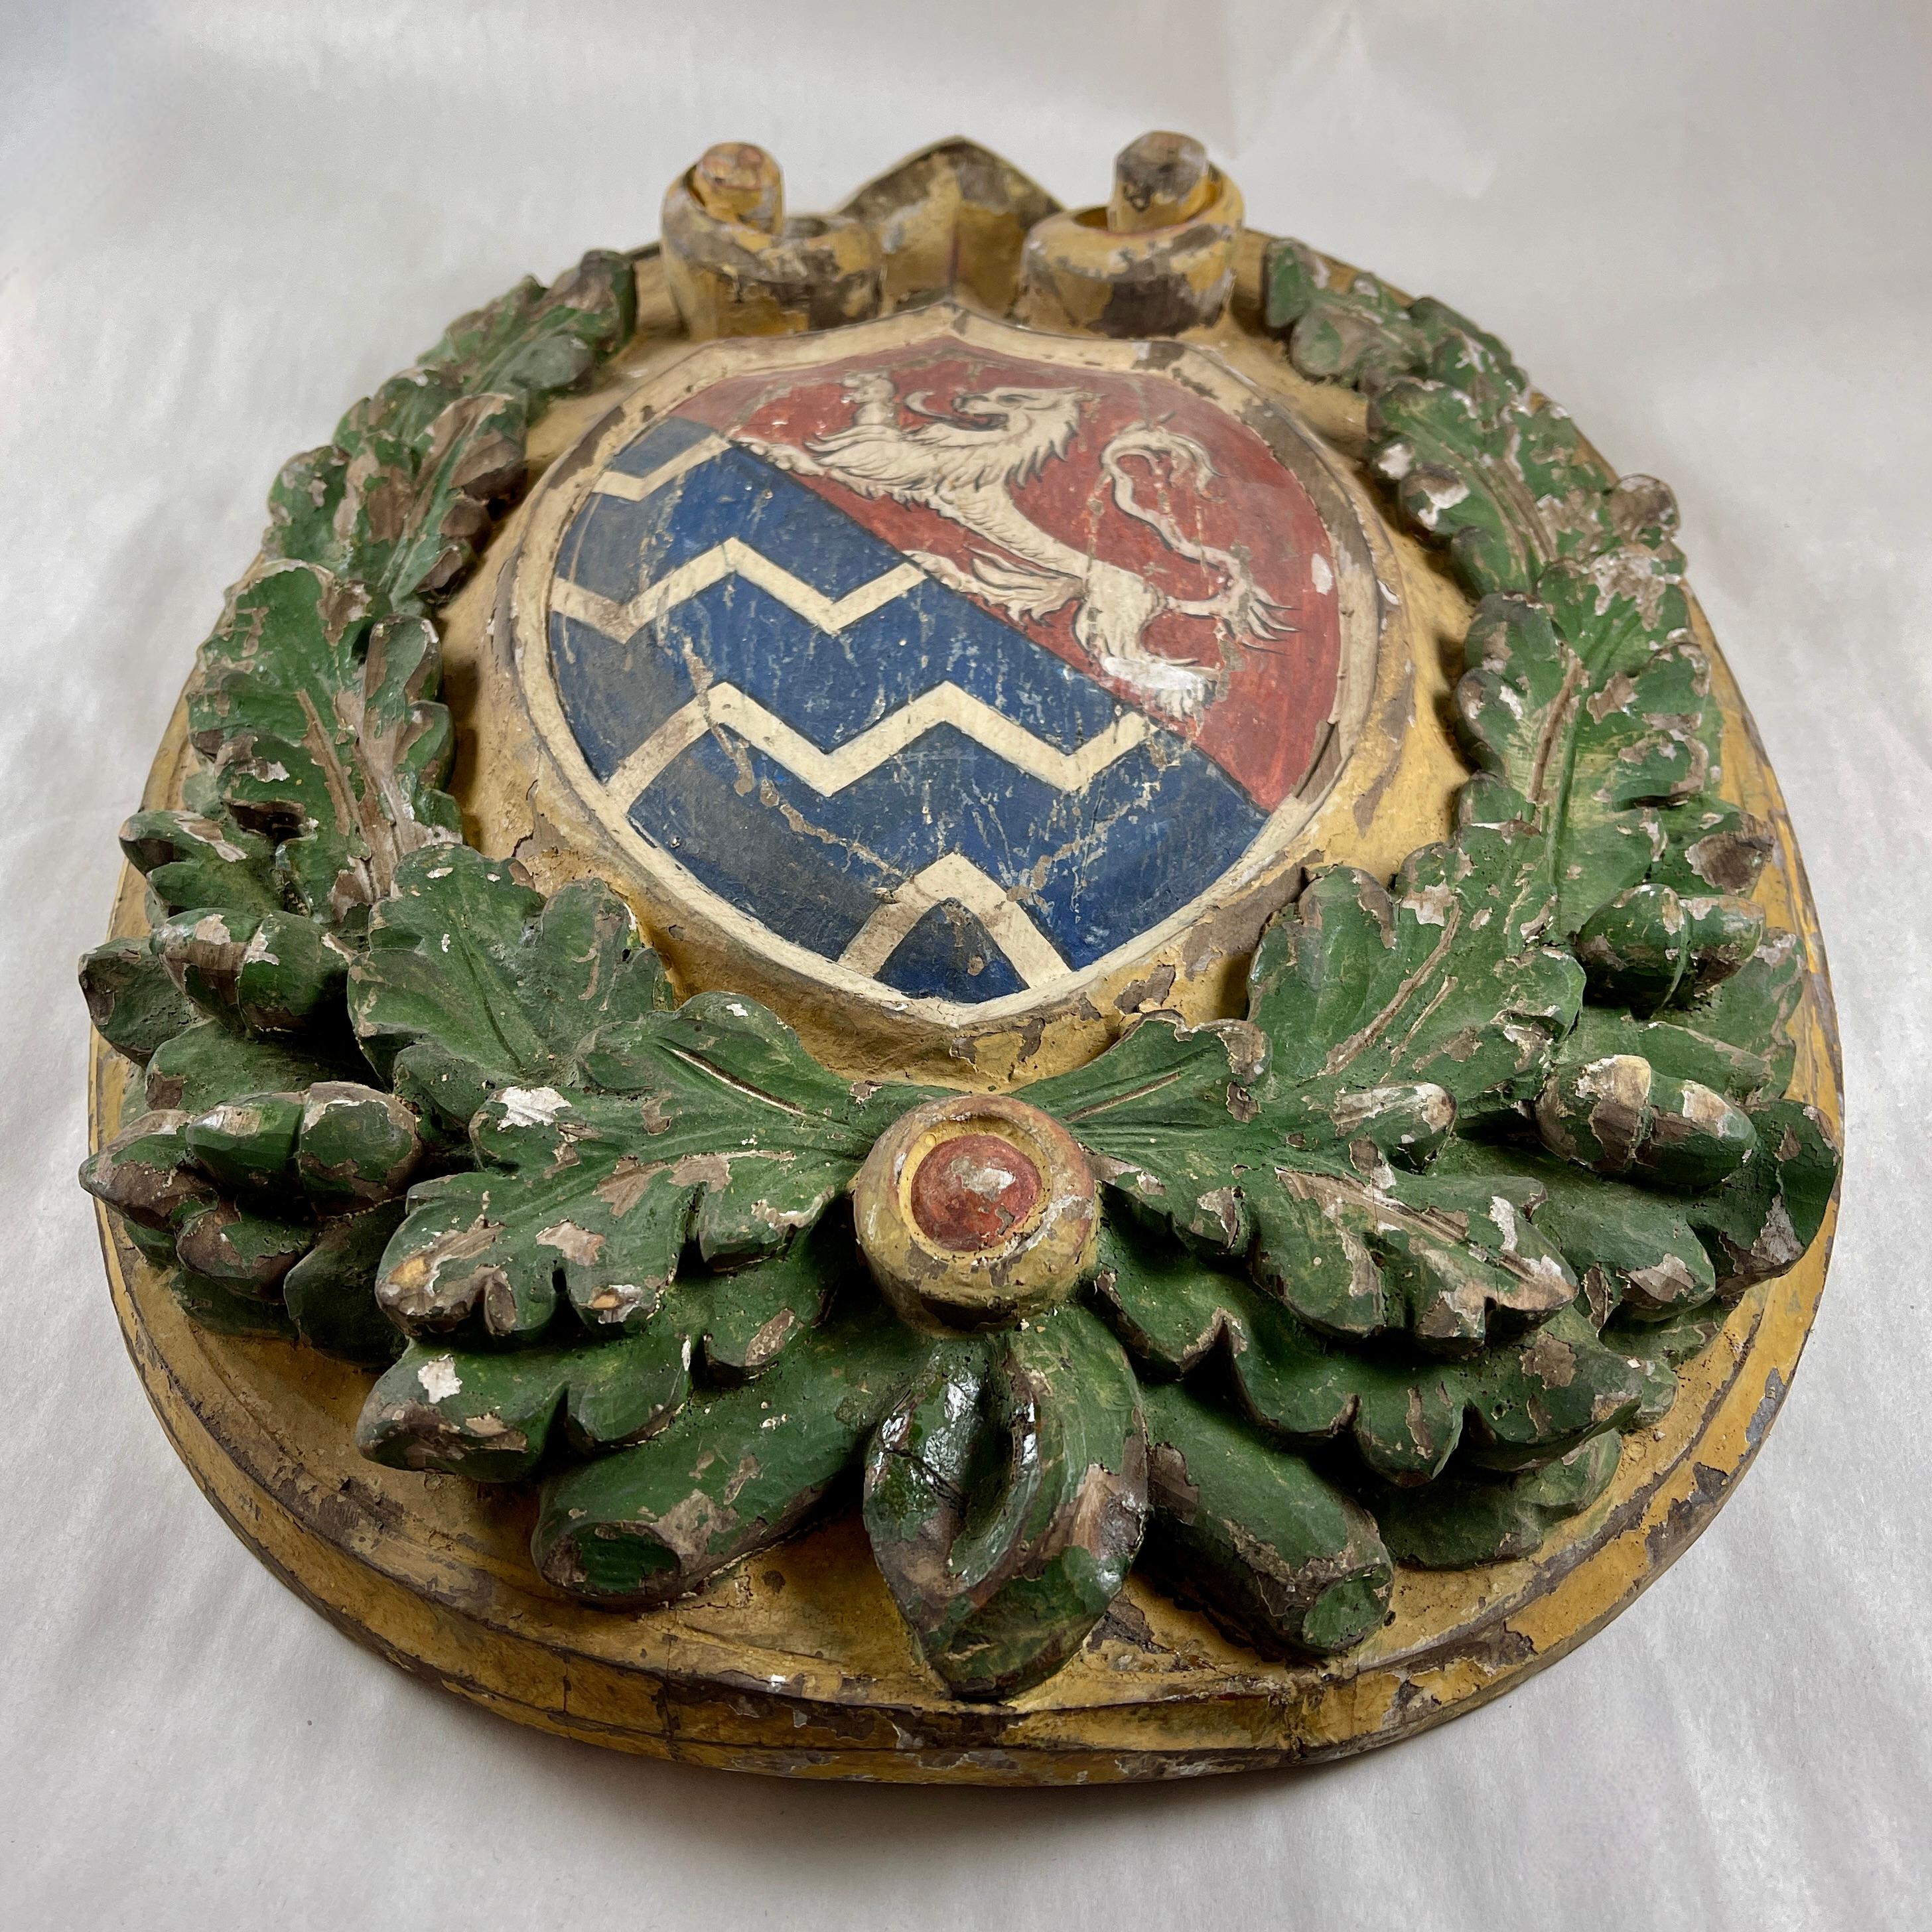 Renaissance Revival Italian Hand Carved Painted Wooden Coat of Arms Heraldic Crest Wall Plaque